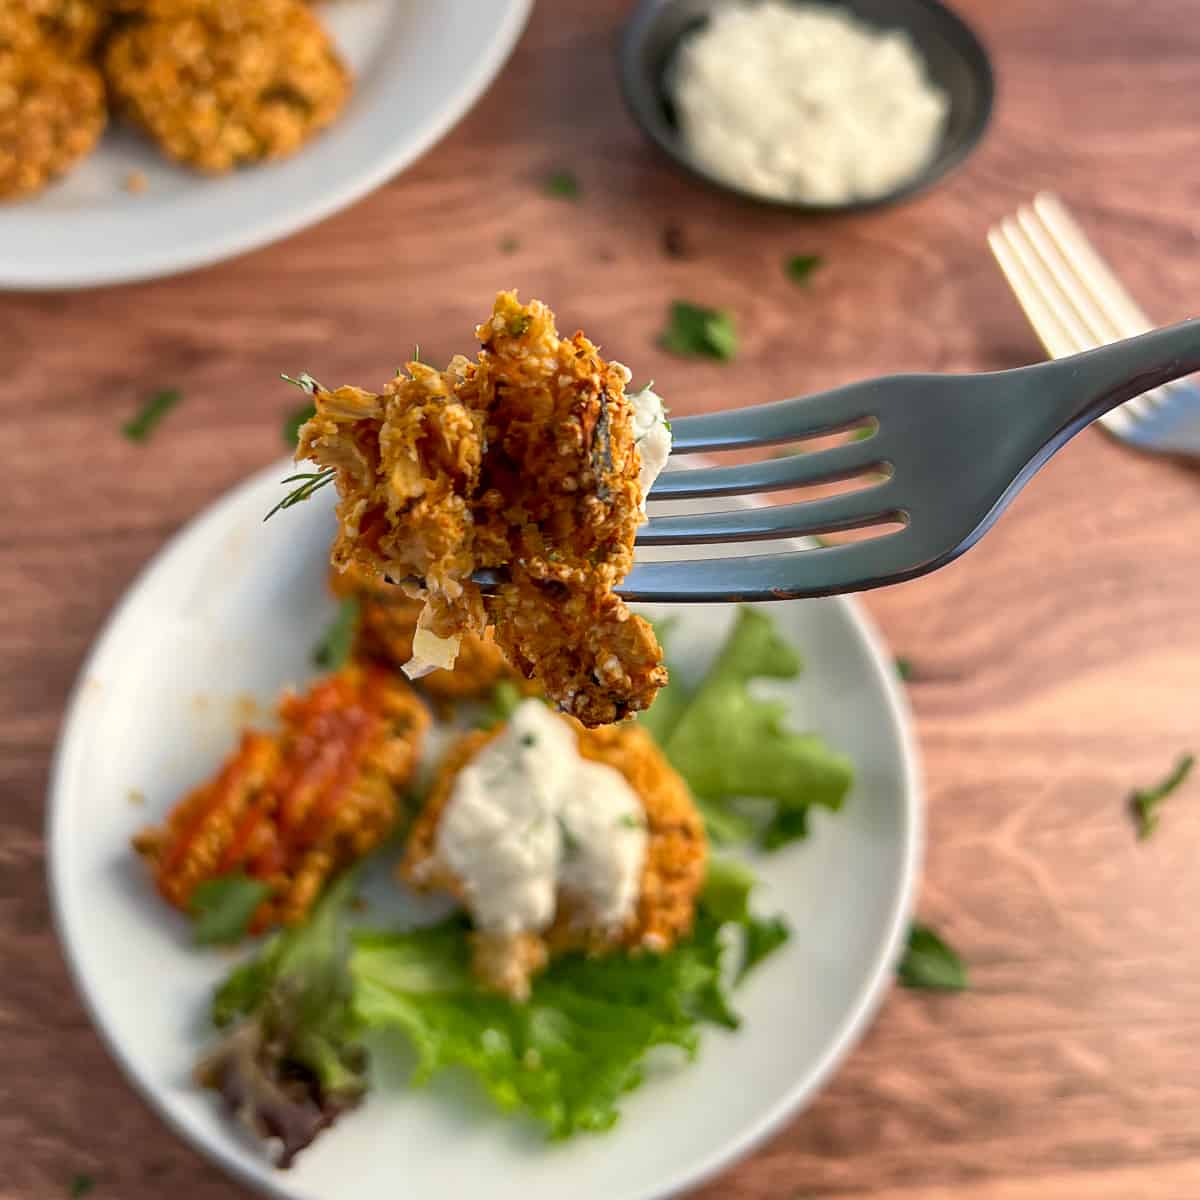 a bite of vegan crab cake on a fork with the plate of crab cakes blurred in the background